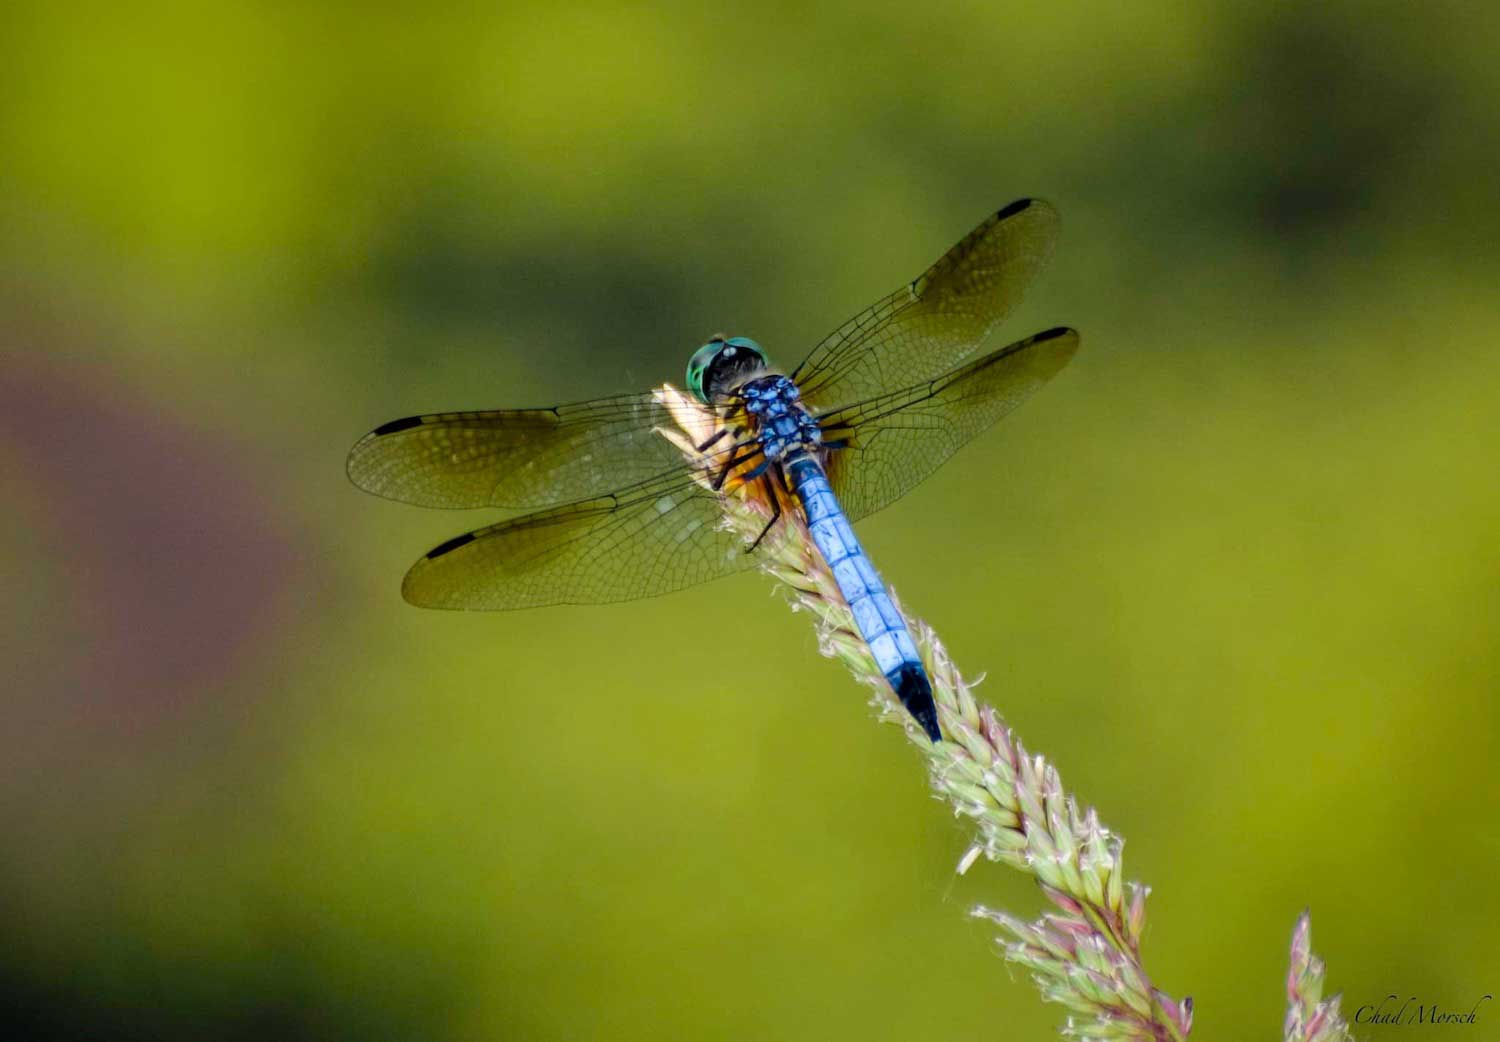 How Many Mosquitoes Do Dragonflies Eat?